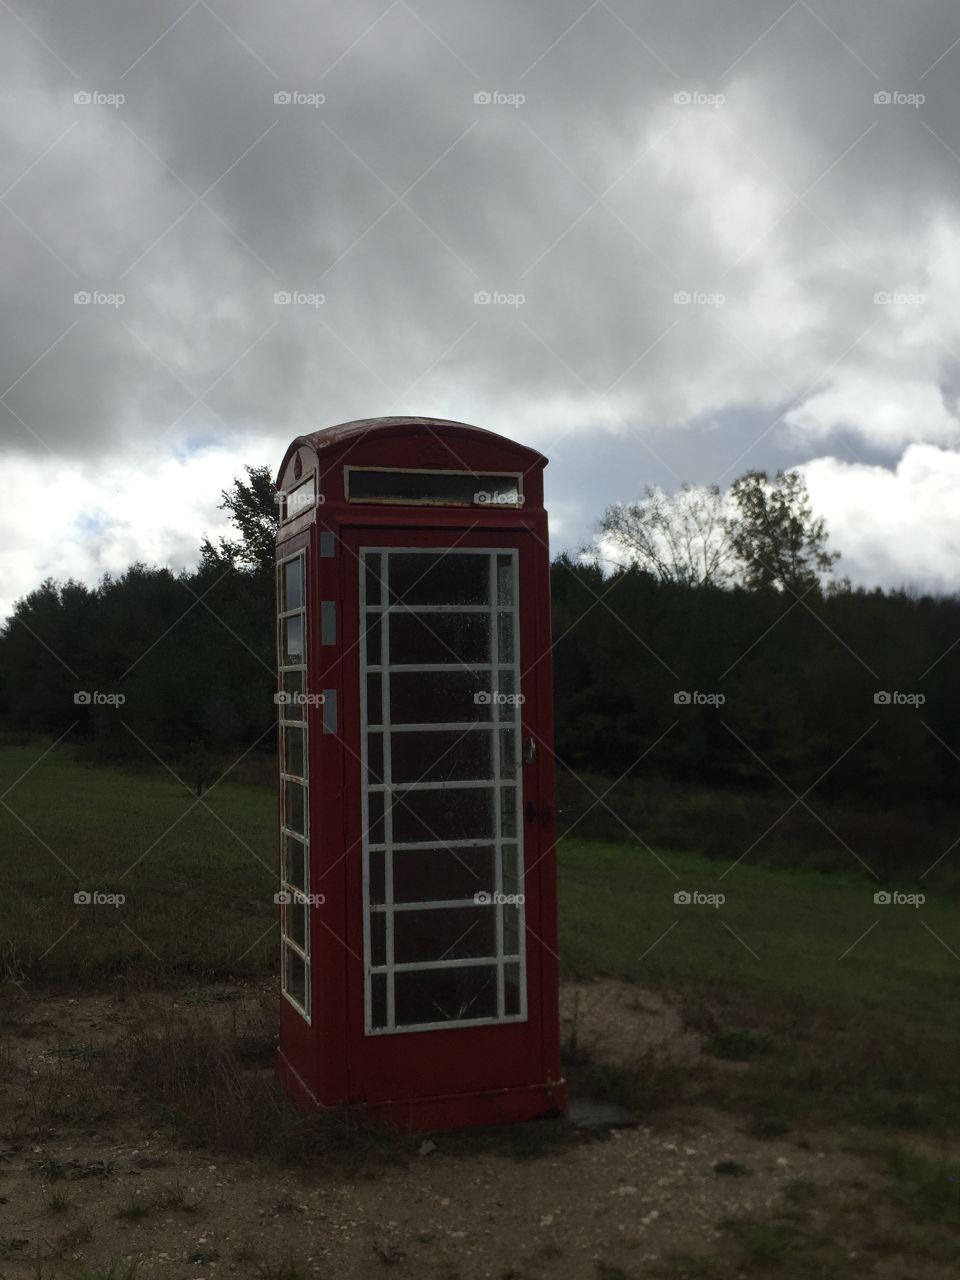 Old phone booth looks like maybe from England used for children to wait for the bus